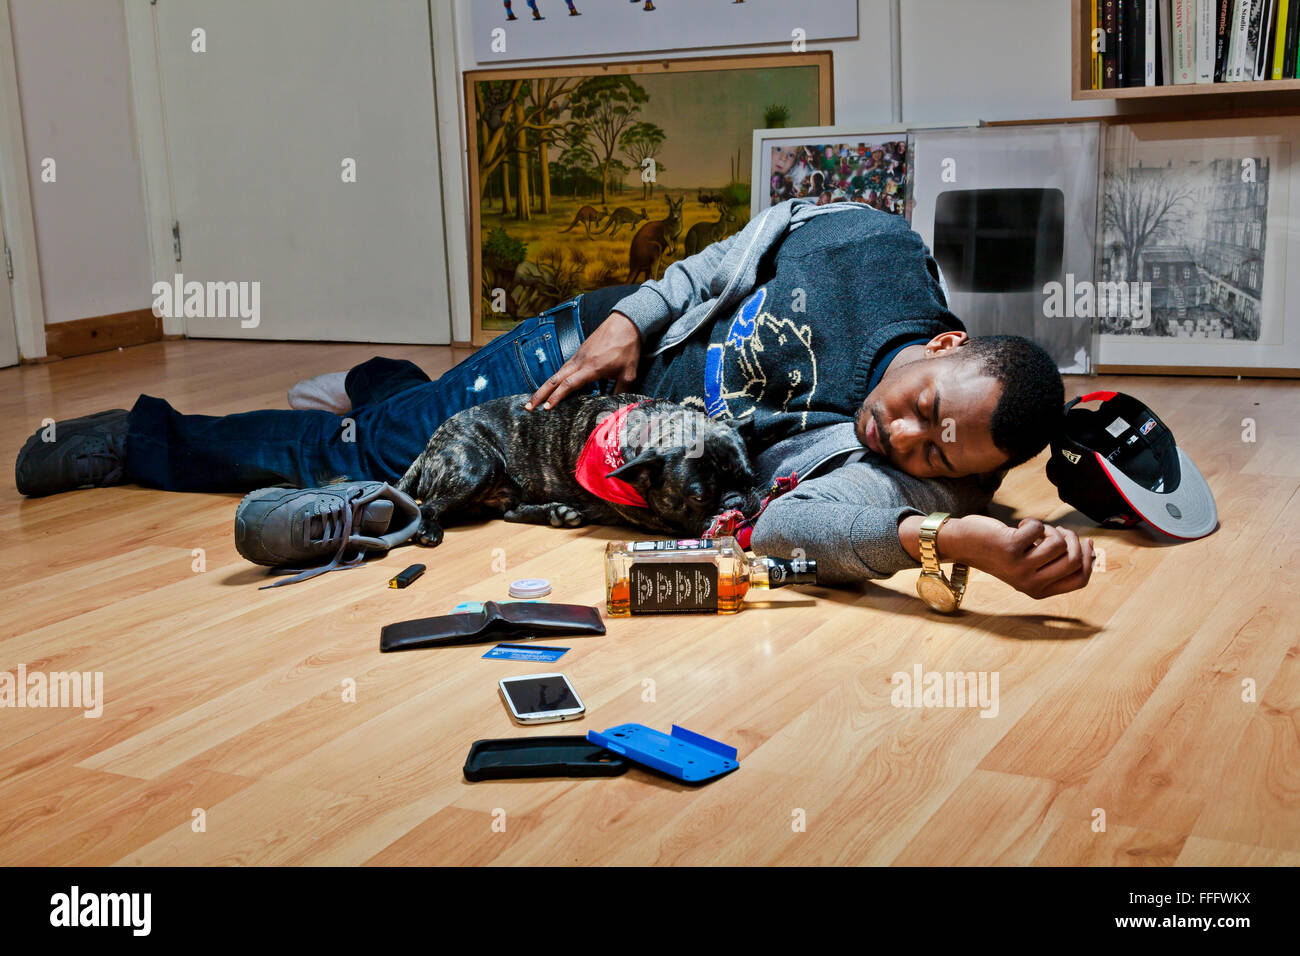 Young man sleeps on floor with a dog leaving a mass. Stock Photo